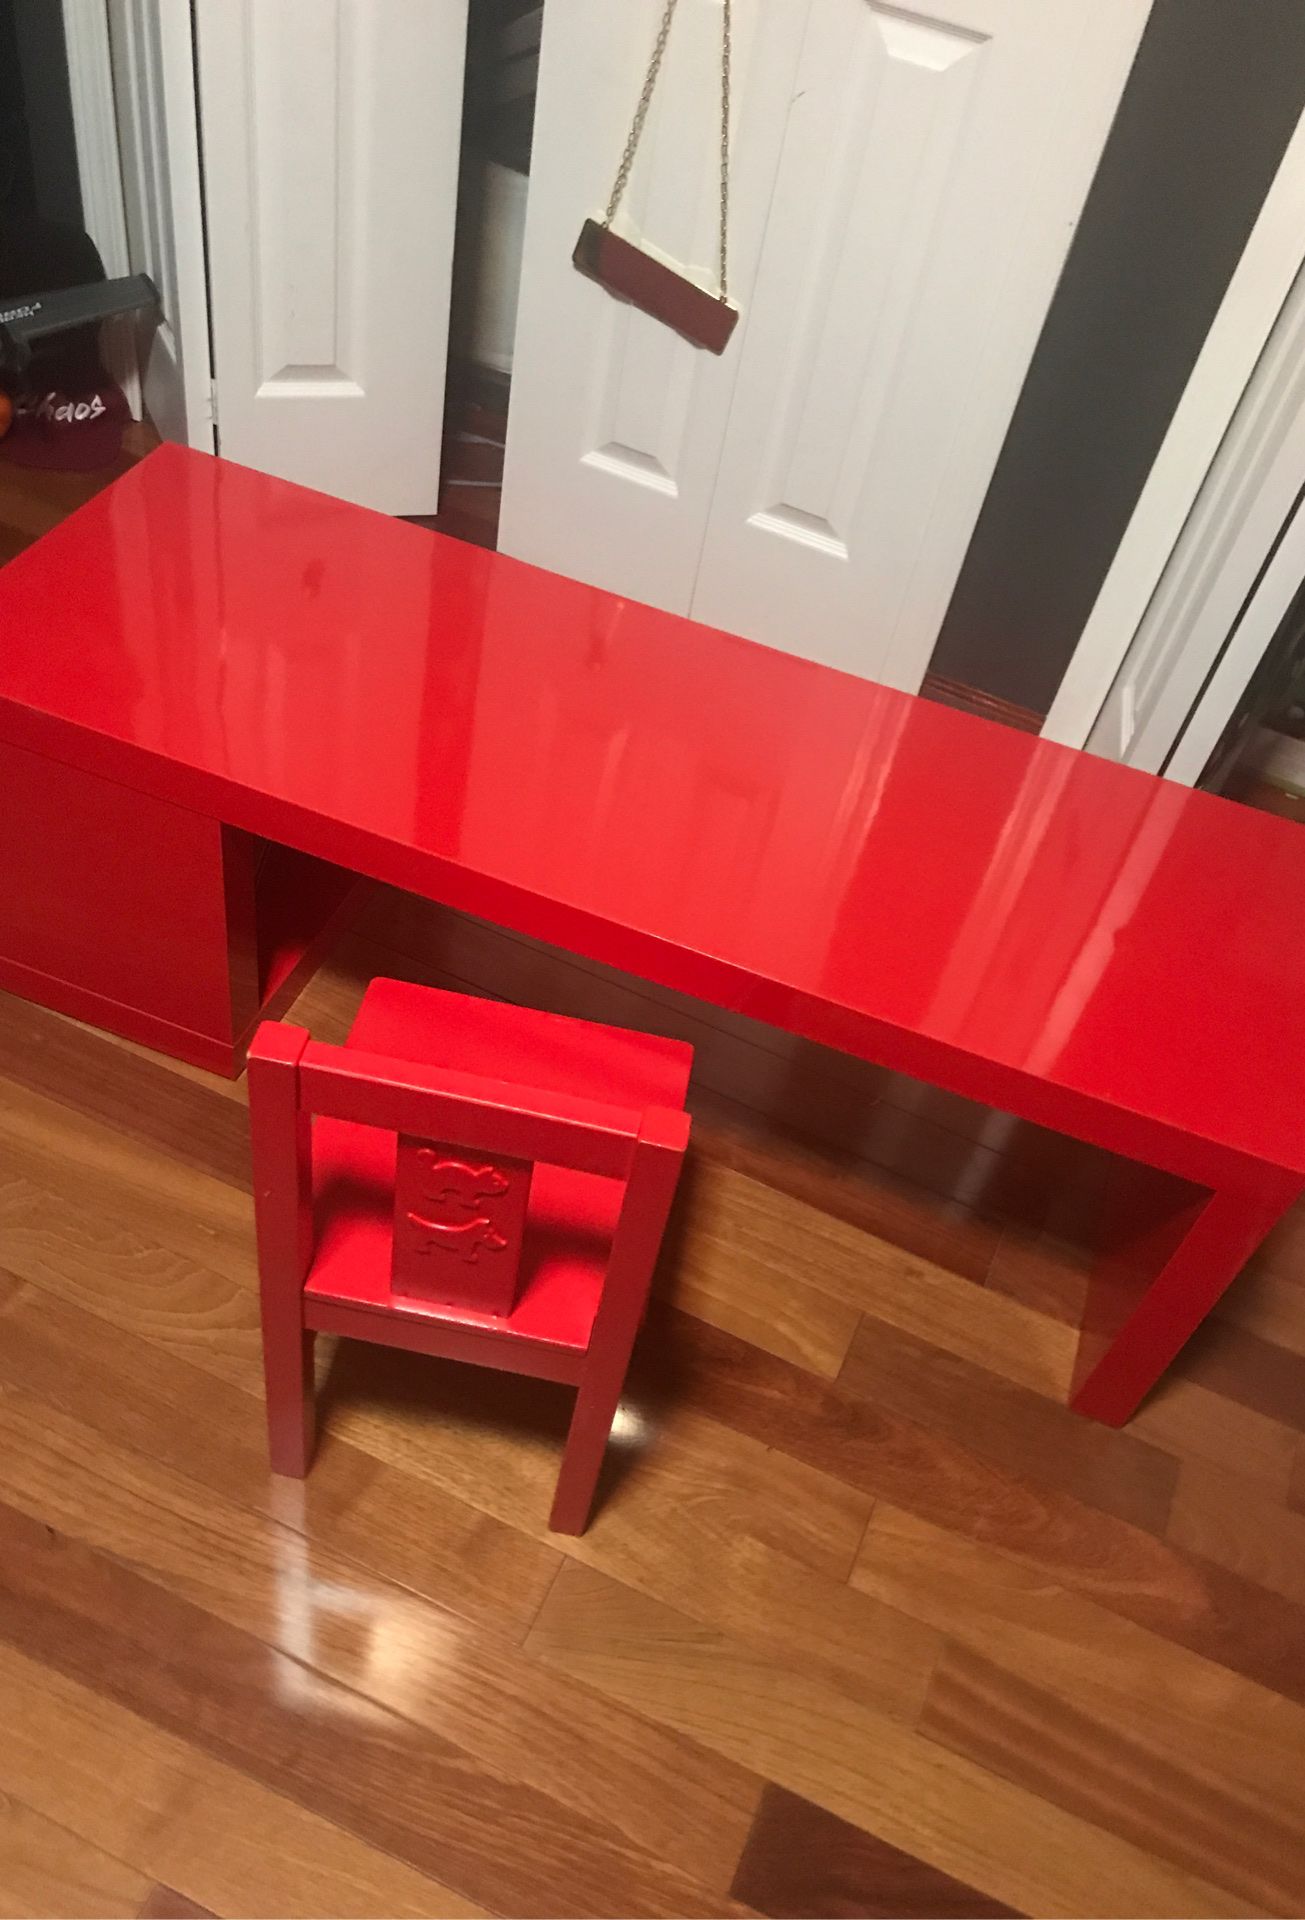 Kids Toddler Table and chair